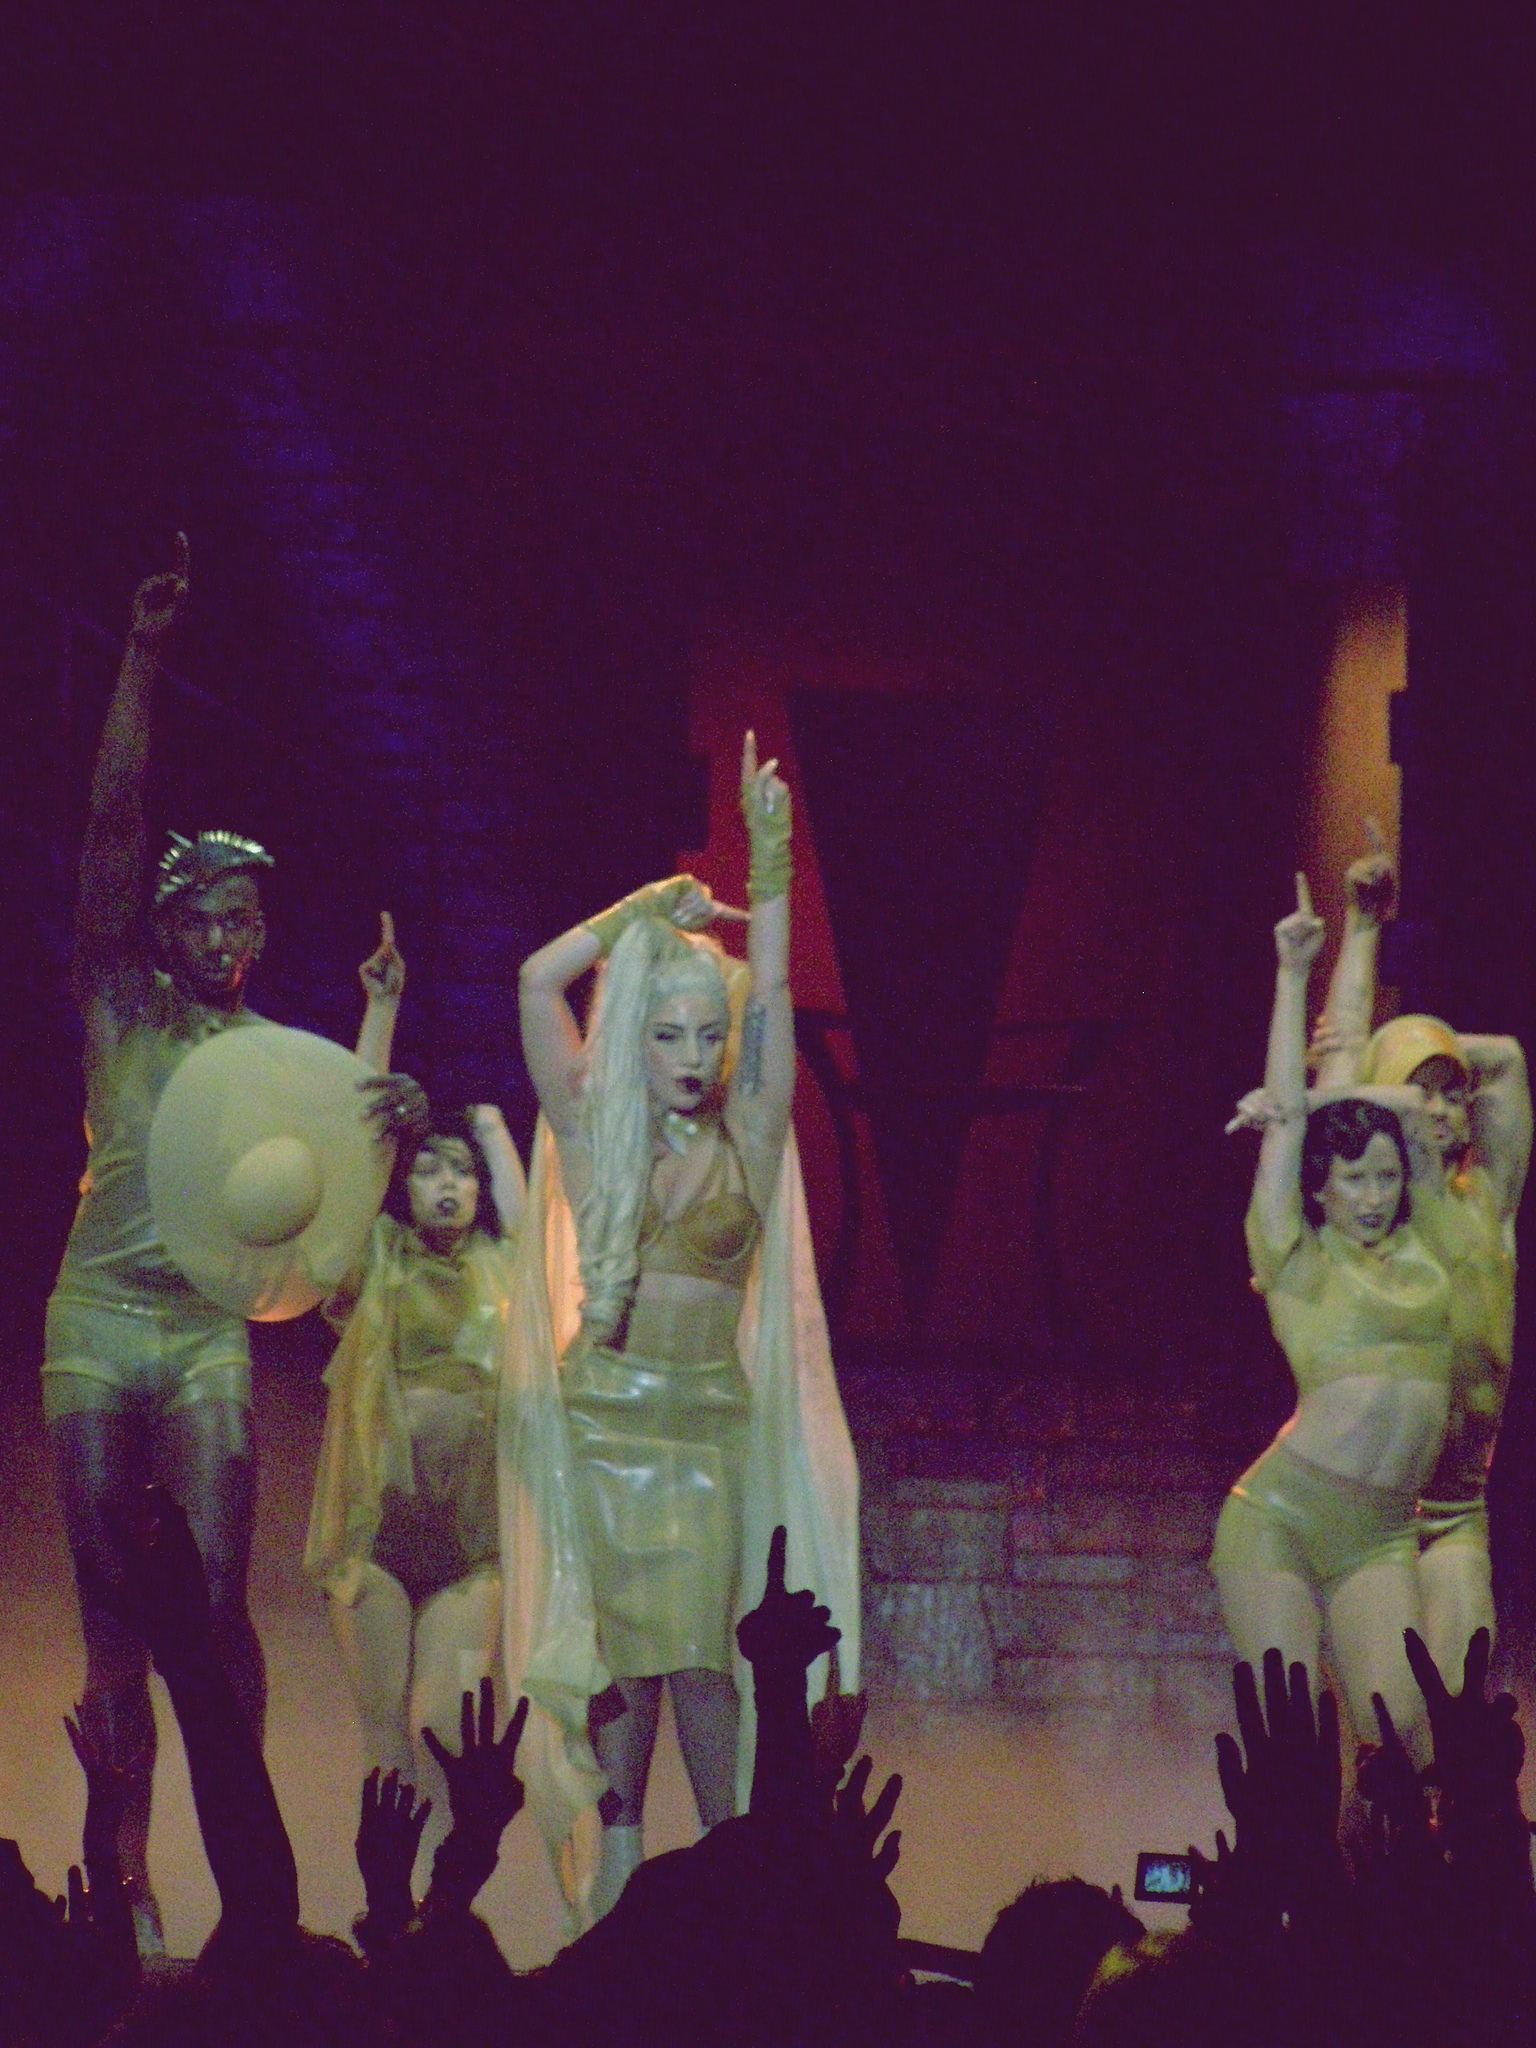 The Born This Way Ball Tour in Antwerp